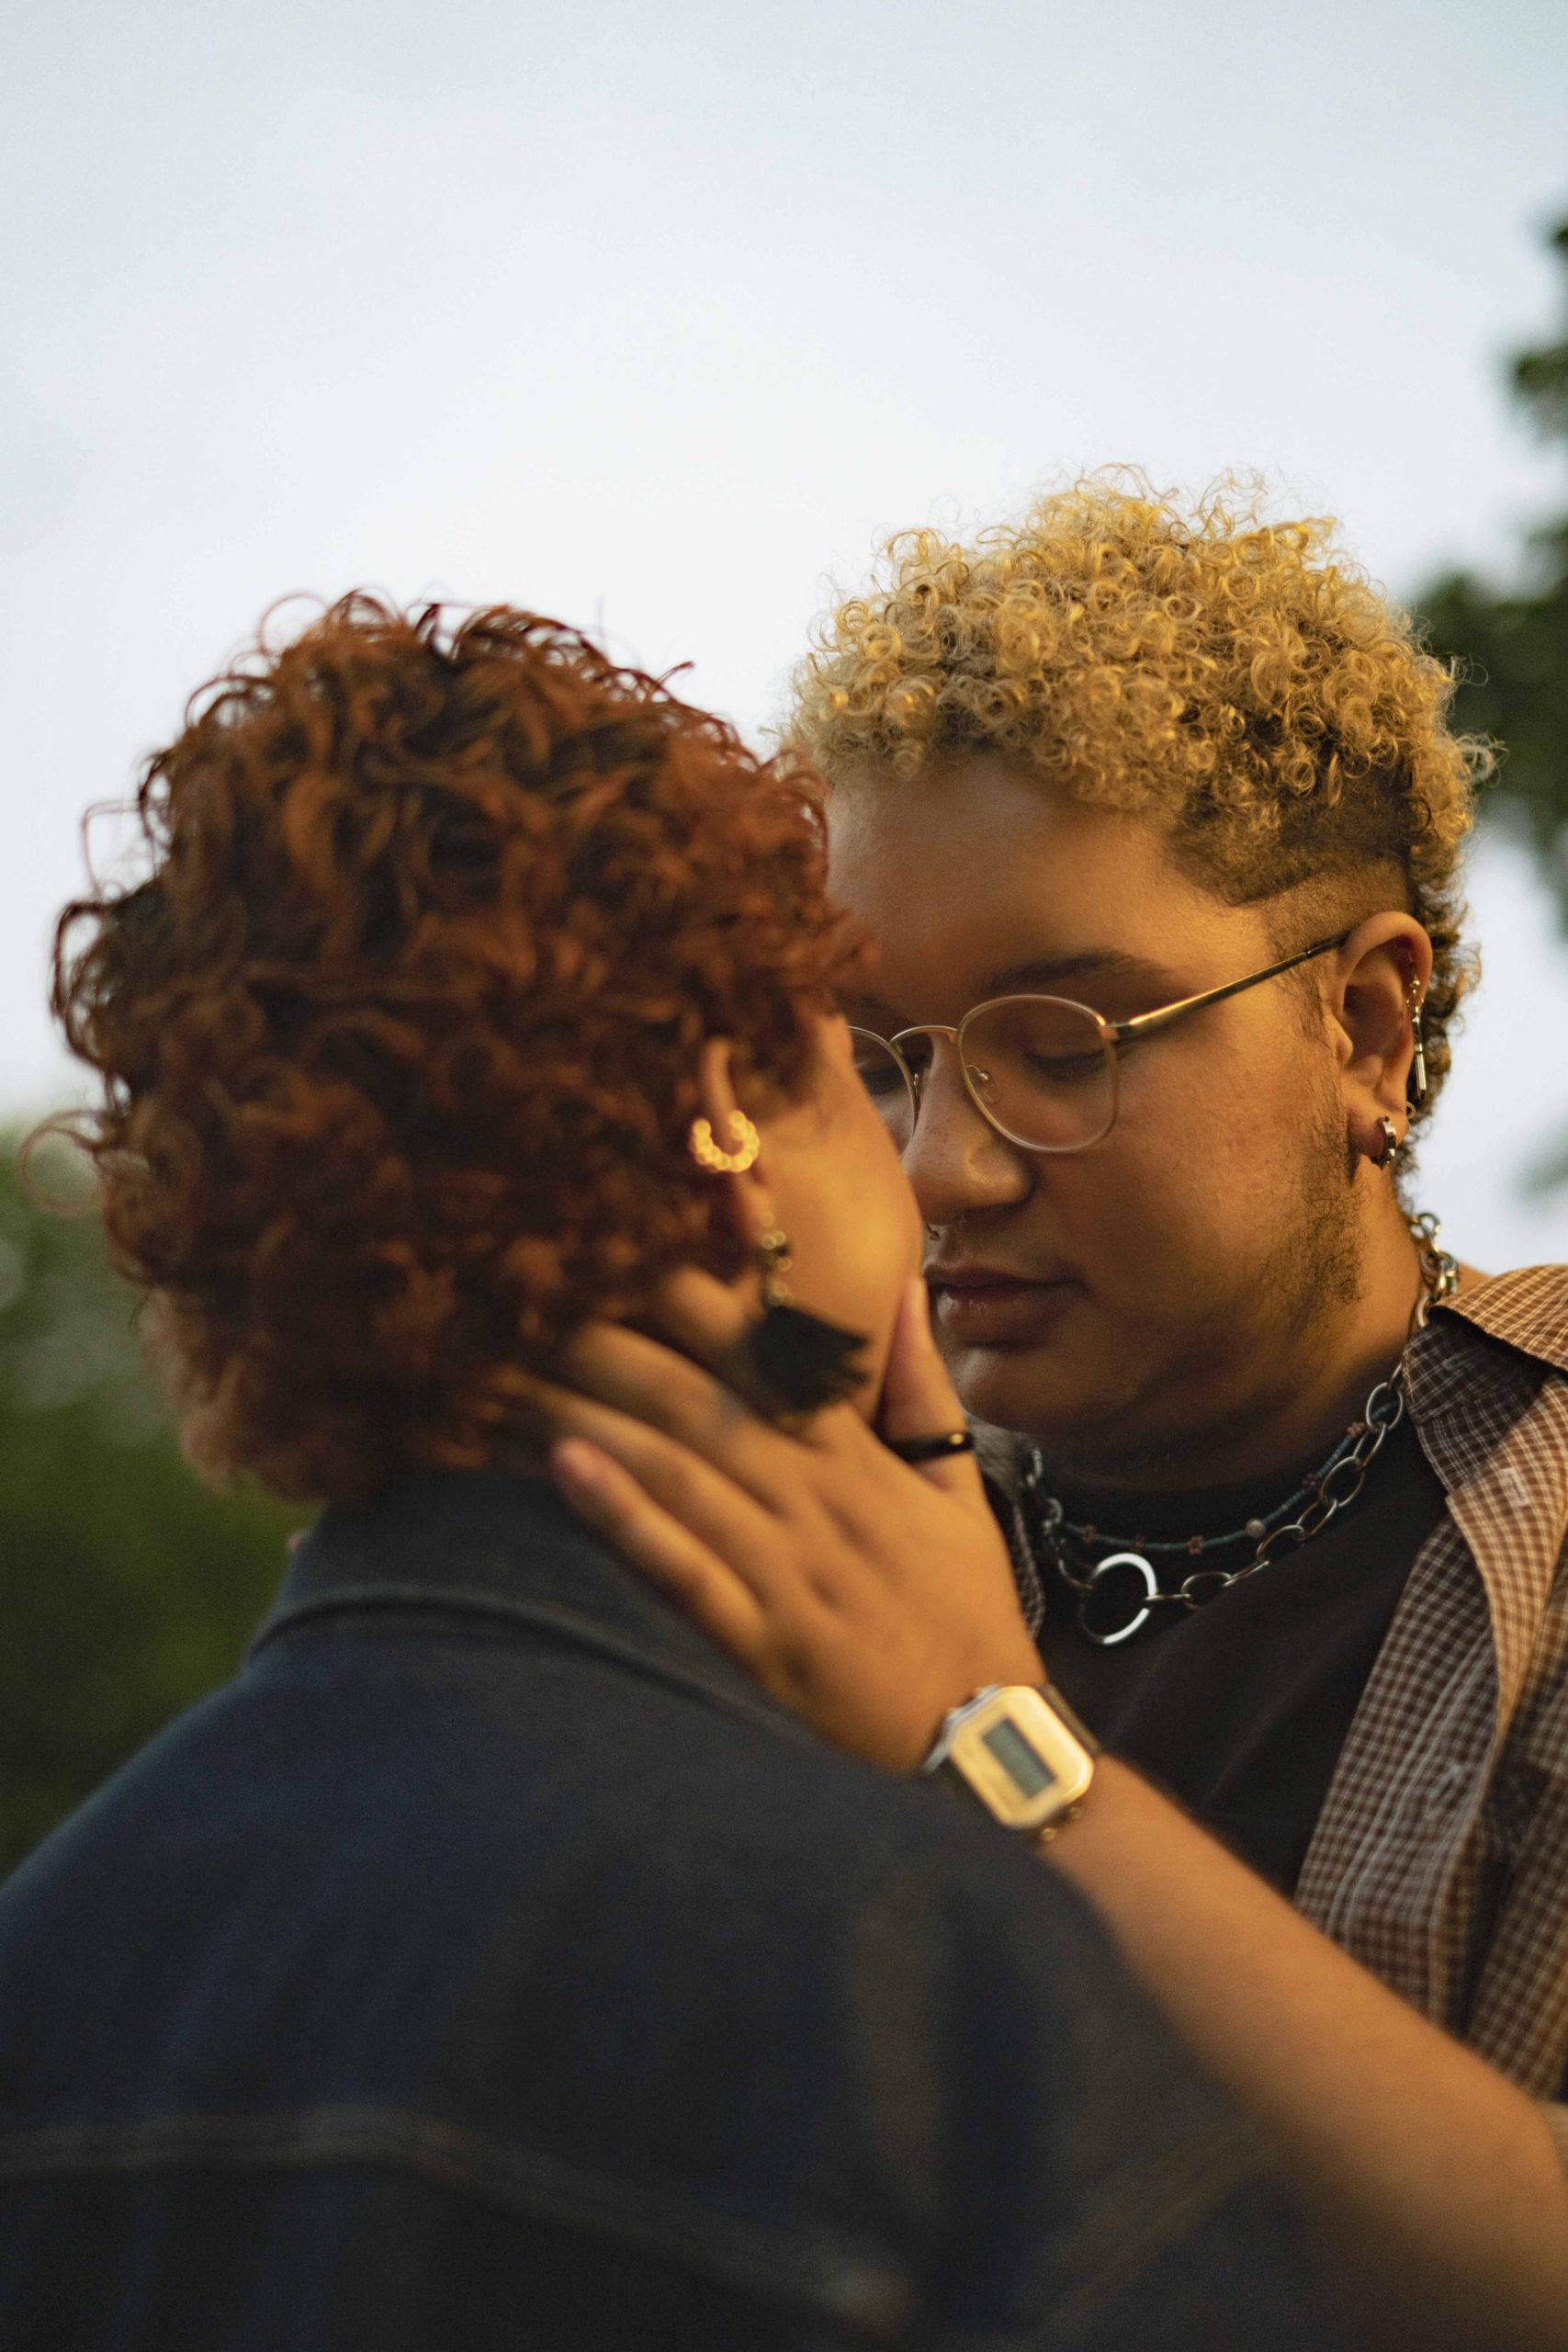 Photo of two short haired queer people about to kiss, from the Gender Spectrum Collection 